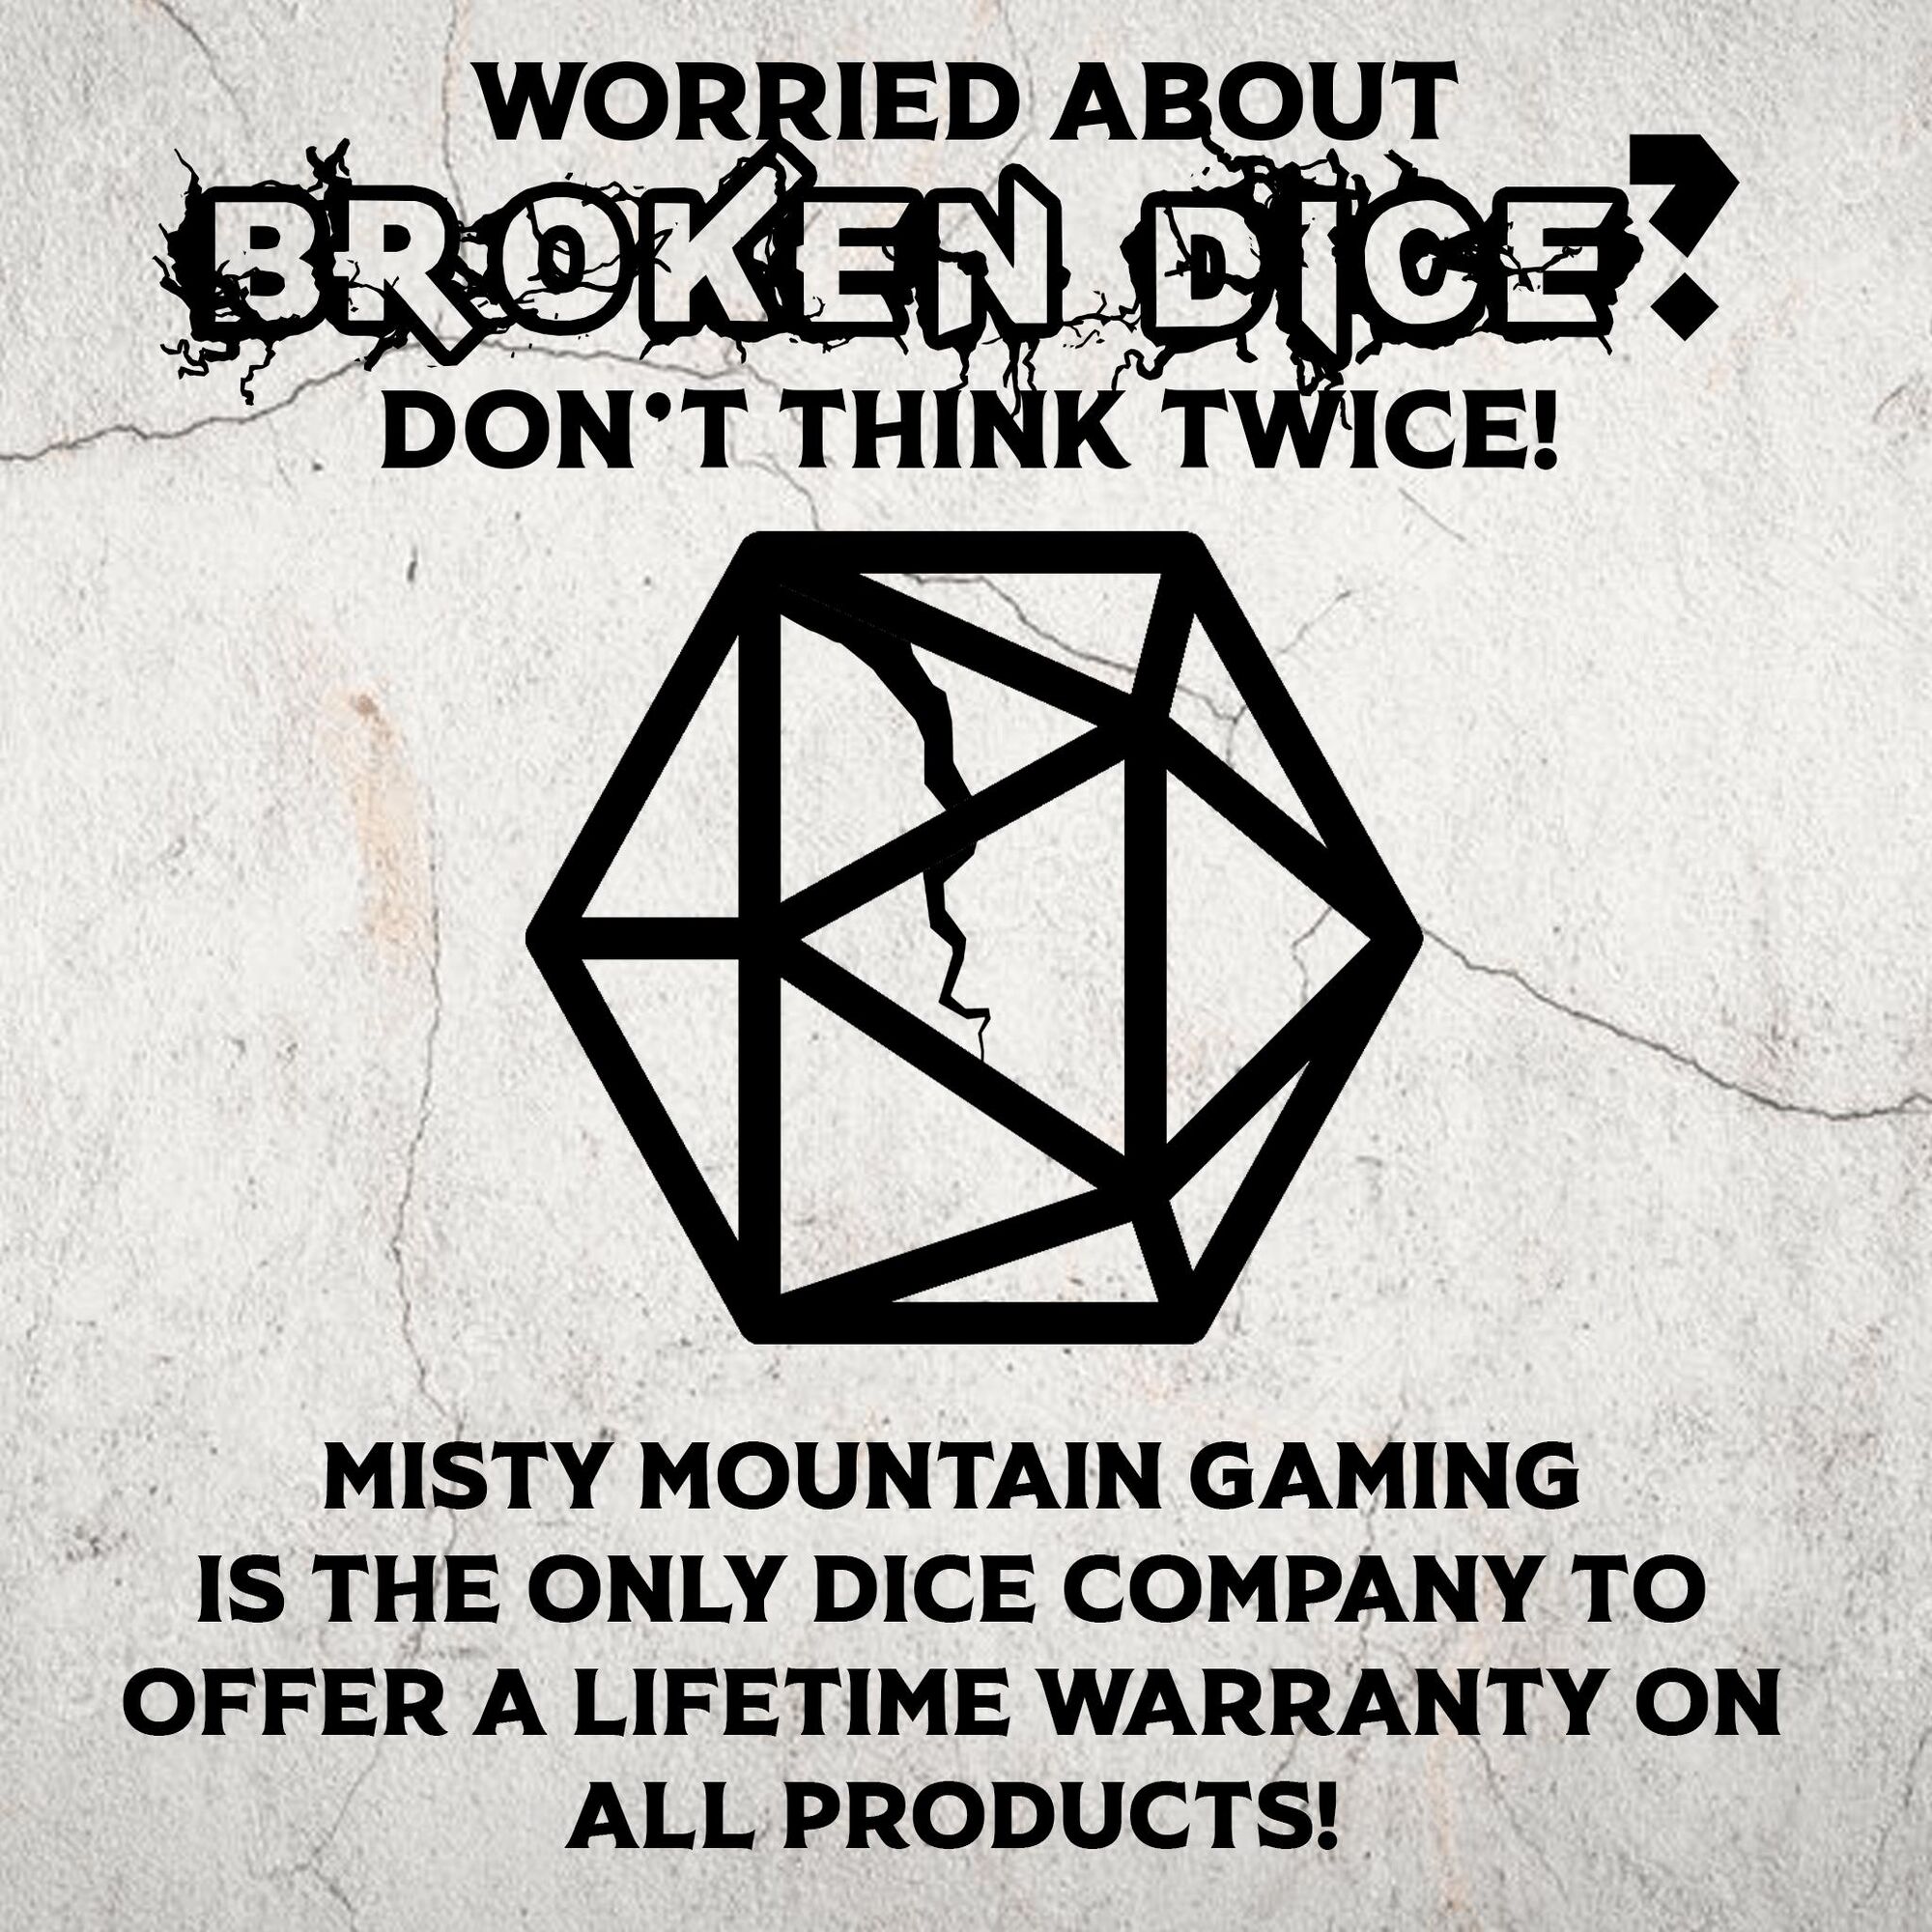  30UT AT MISTY MOUNTAIN GAMING IS THE ONLY DICE COMPANY TO OFFER A LIFETIME WARRANTY ON ALL PRODUCTS! 